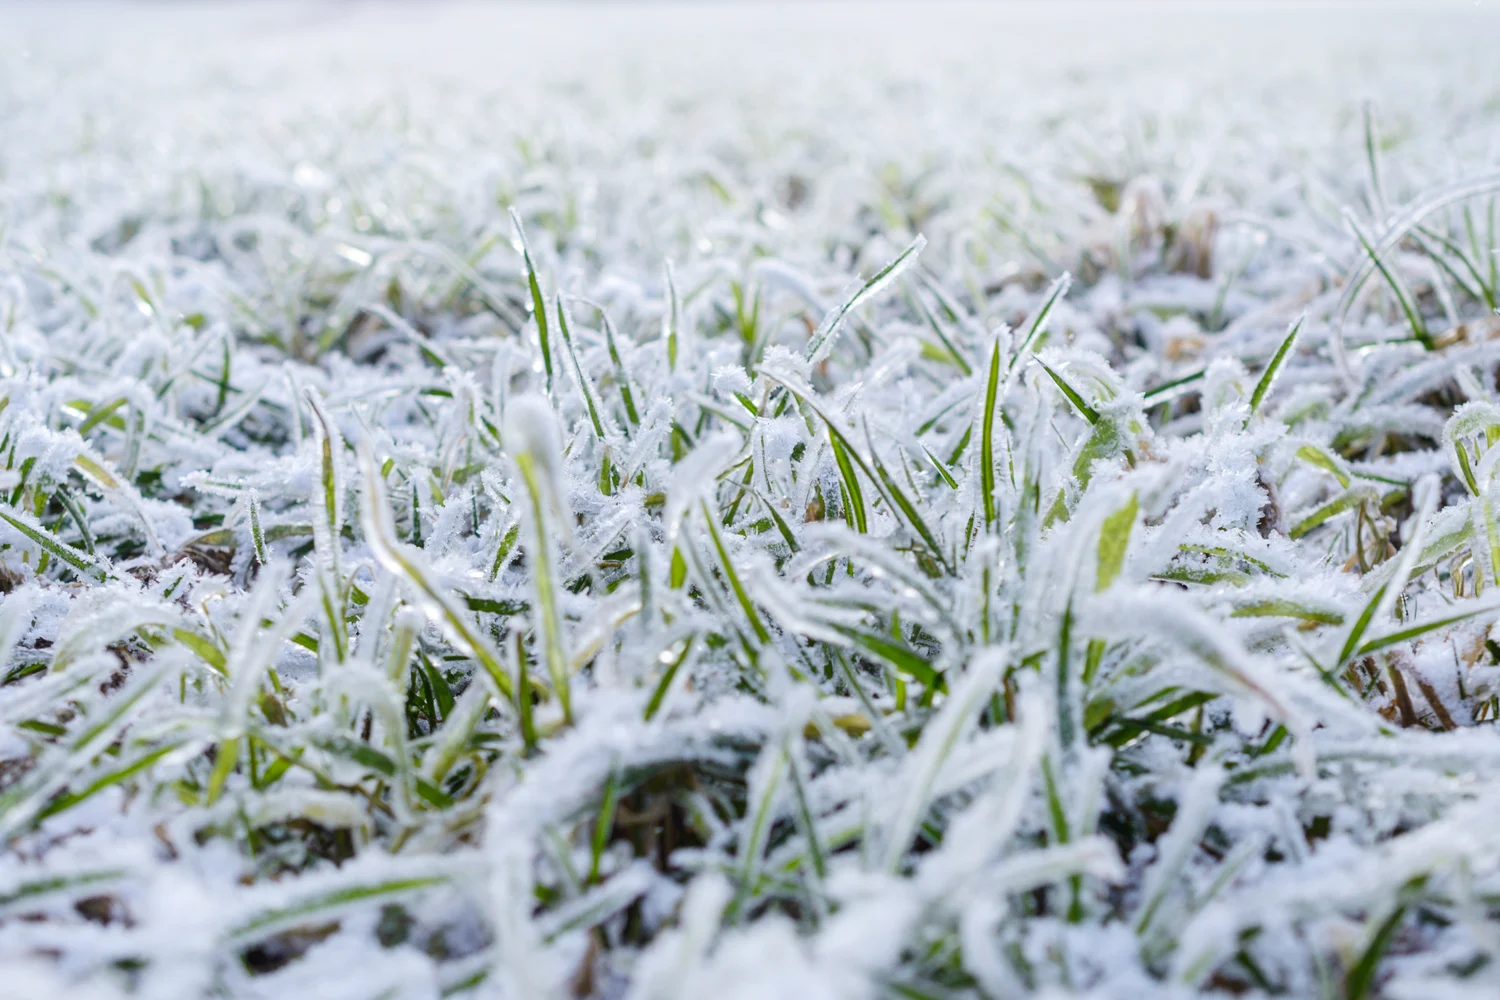 How To Fix Winter-Killed Grass